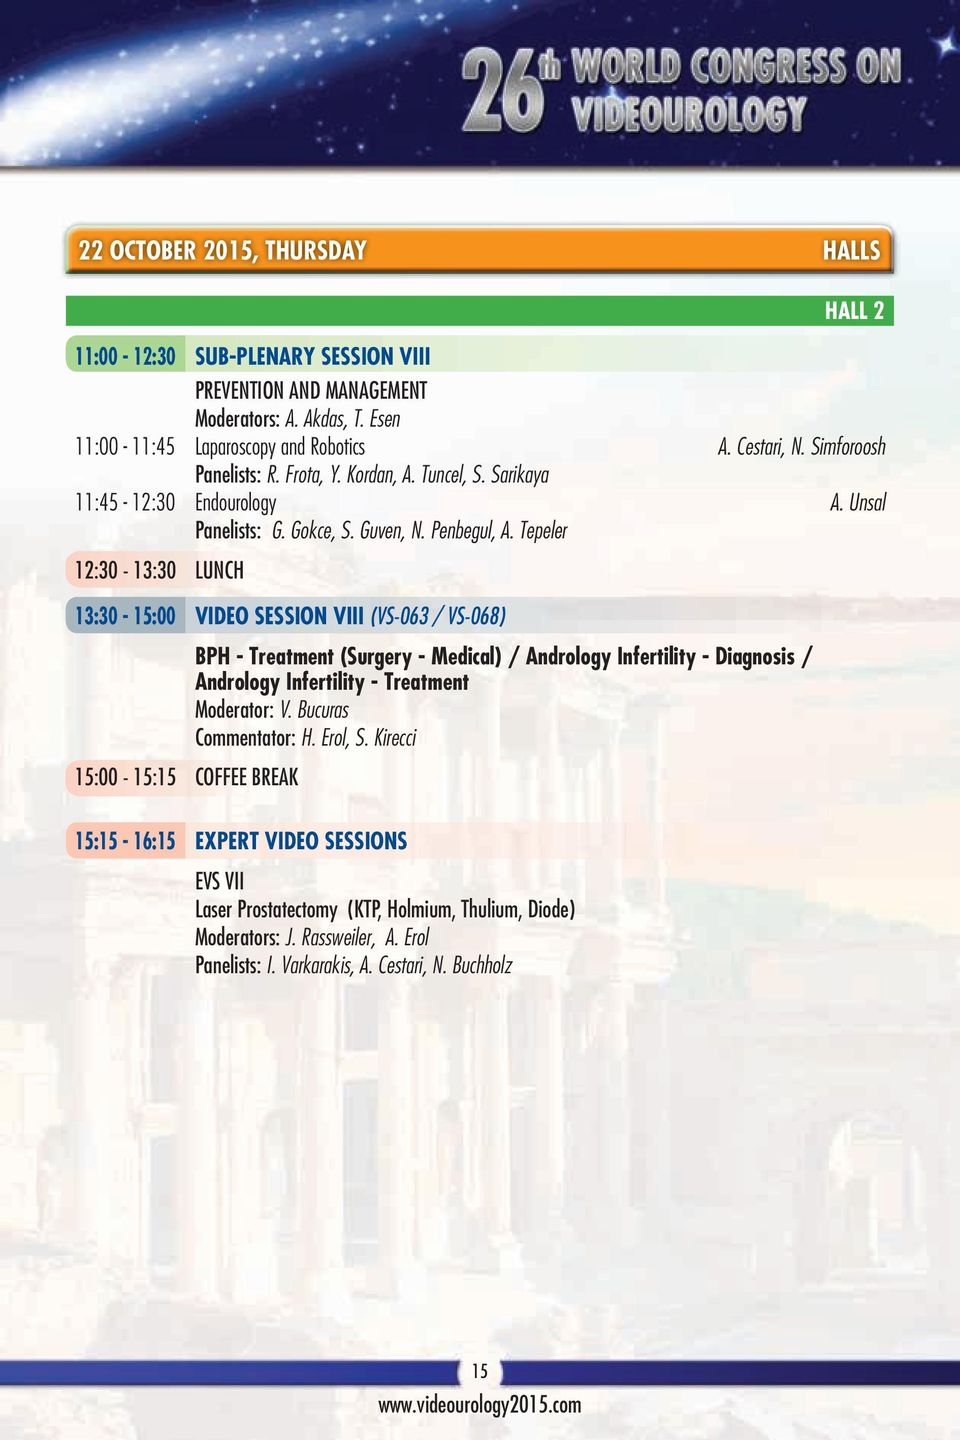 Tepeler 12:30-13:30 LUNCH 13:30-15:00 VIDEO SESSION VIII (VS-063 / VS-068) 15:00-15:15 COFFEE BREAK BPH - Treatment (Surgery - Medical) / Andrology Infertility - Diagnosis / Andrology